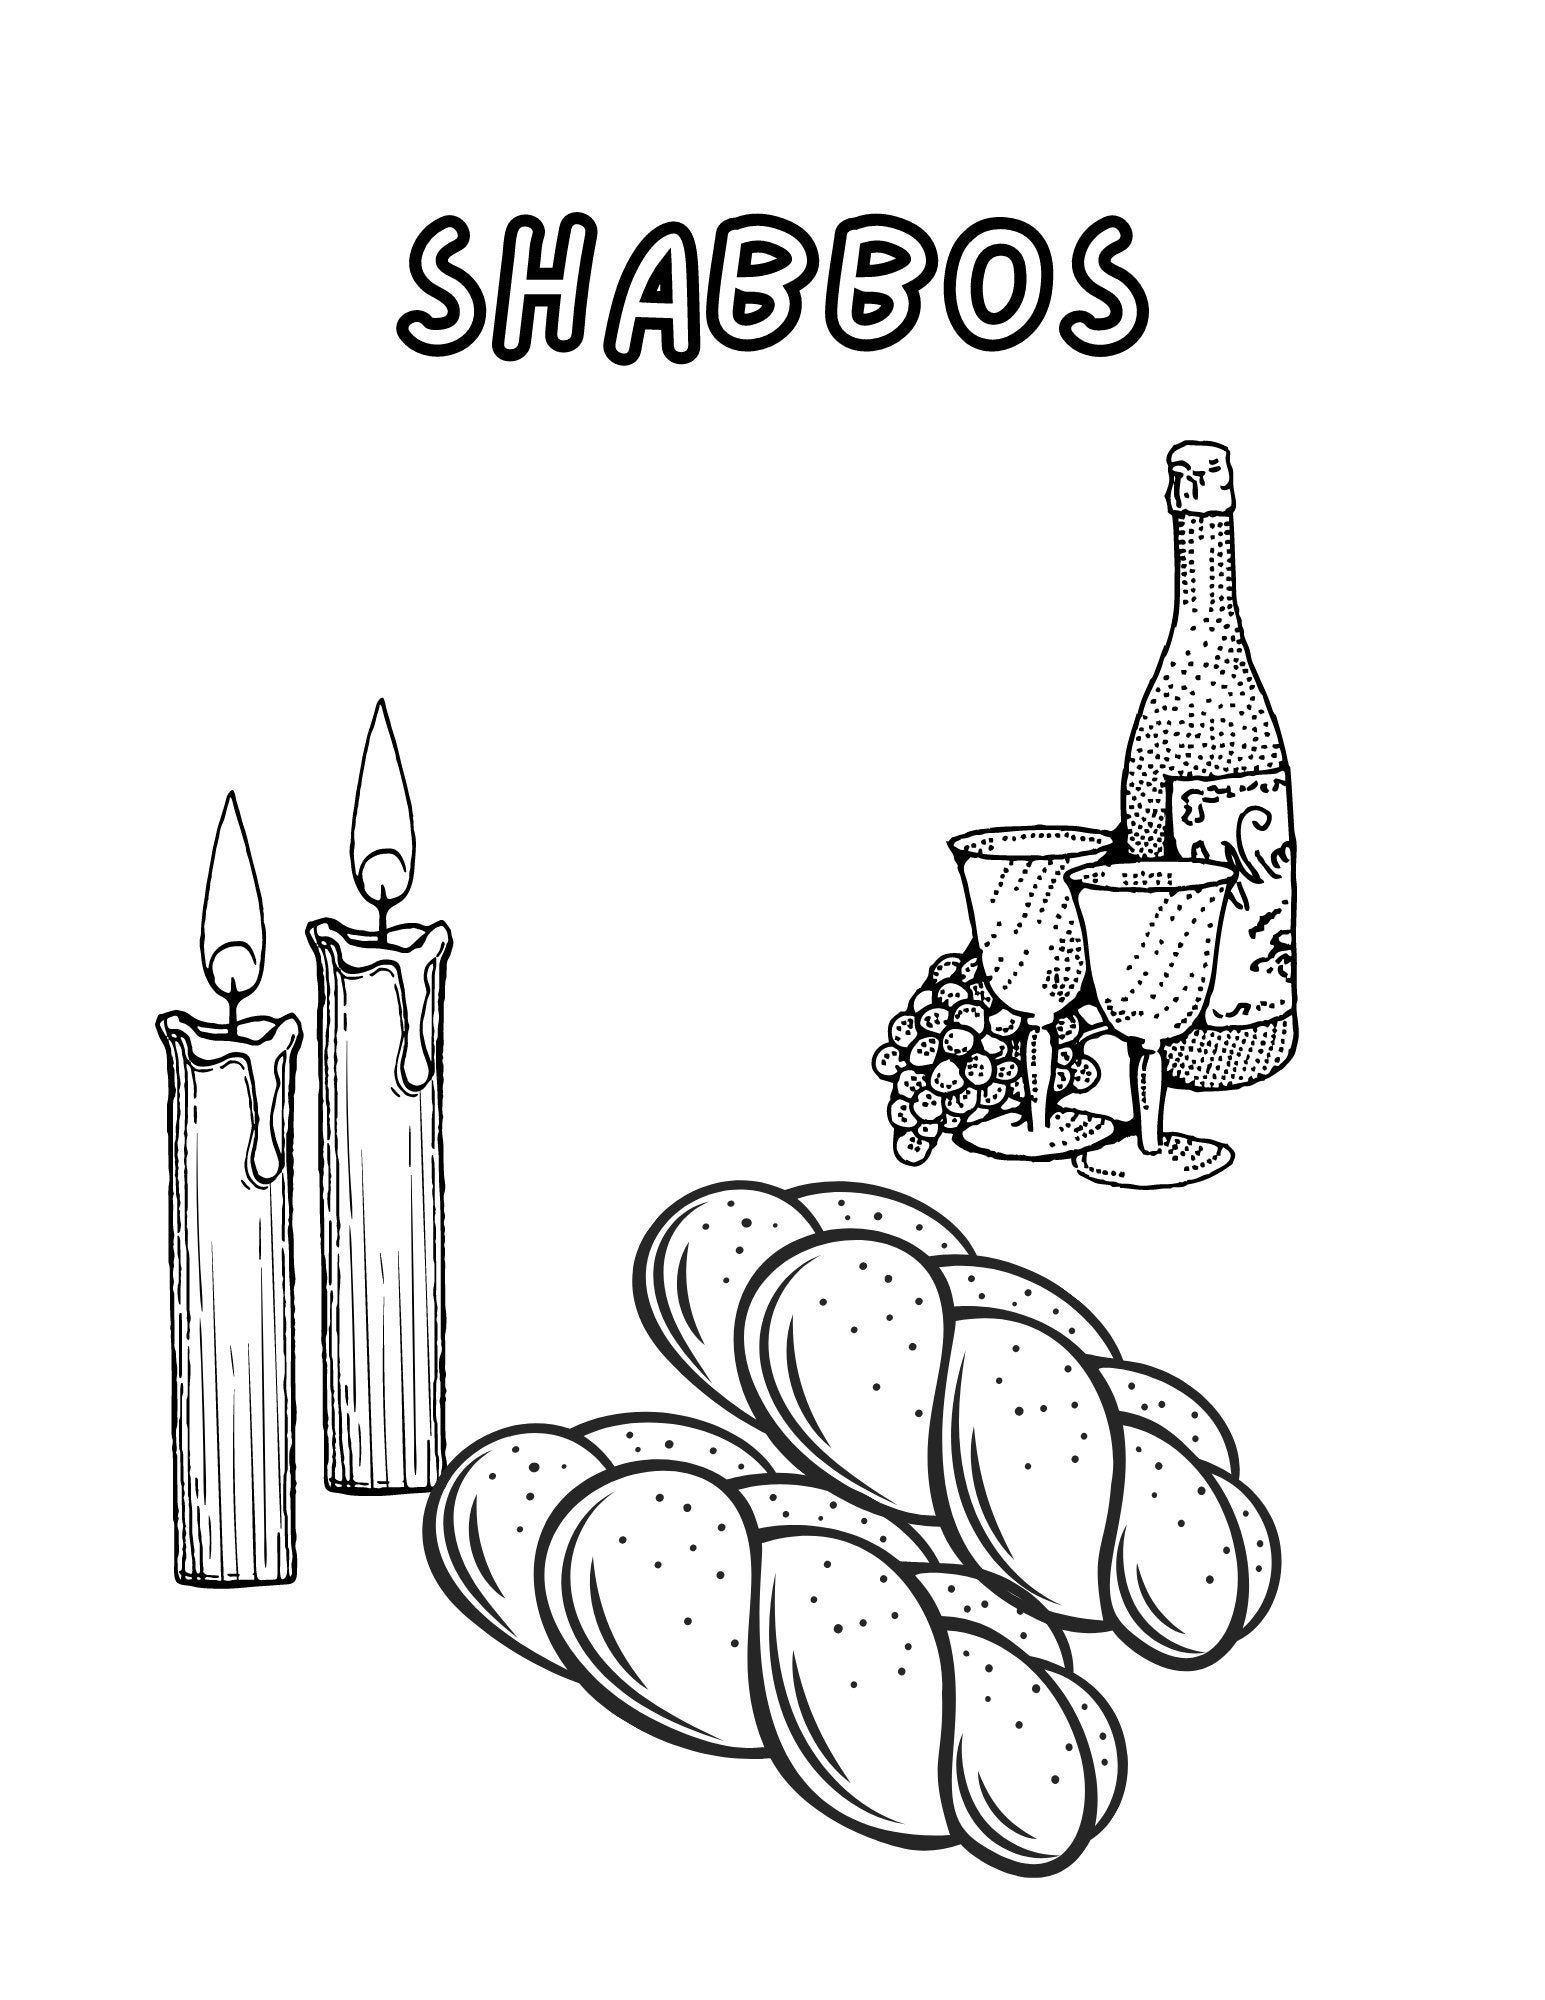 Shabbos Coloring Page - Etsy